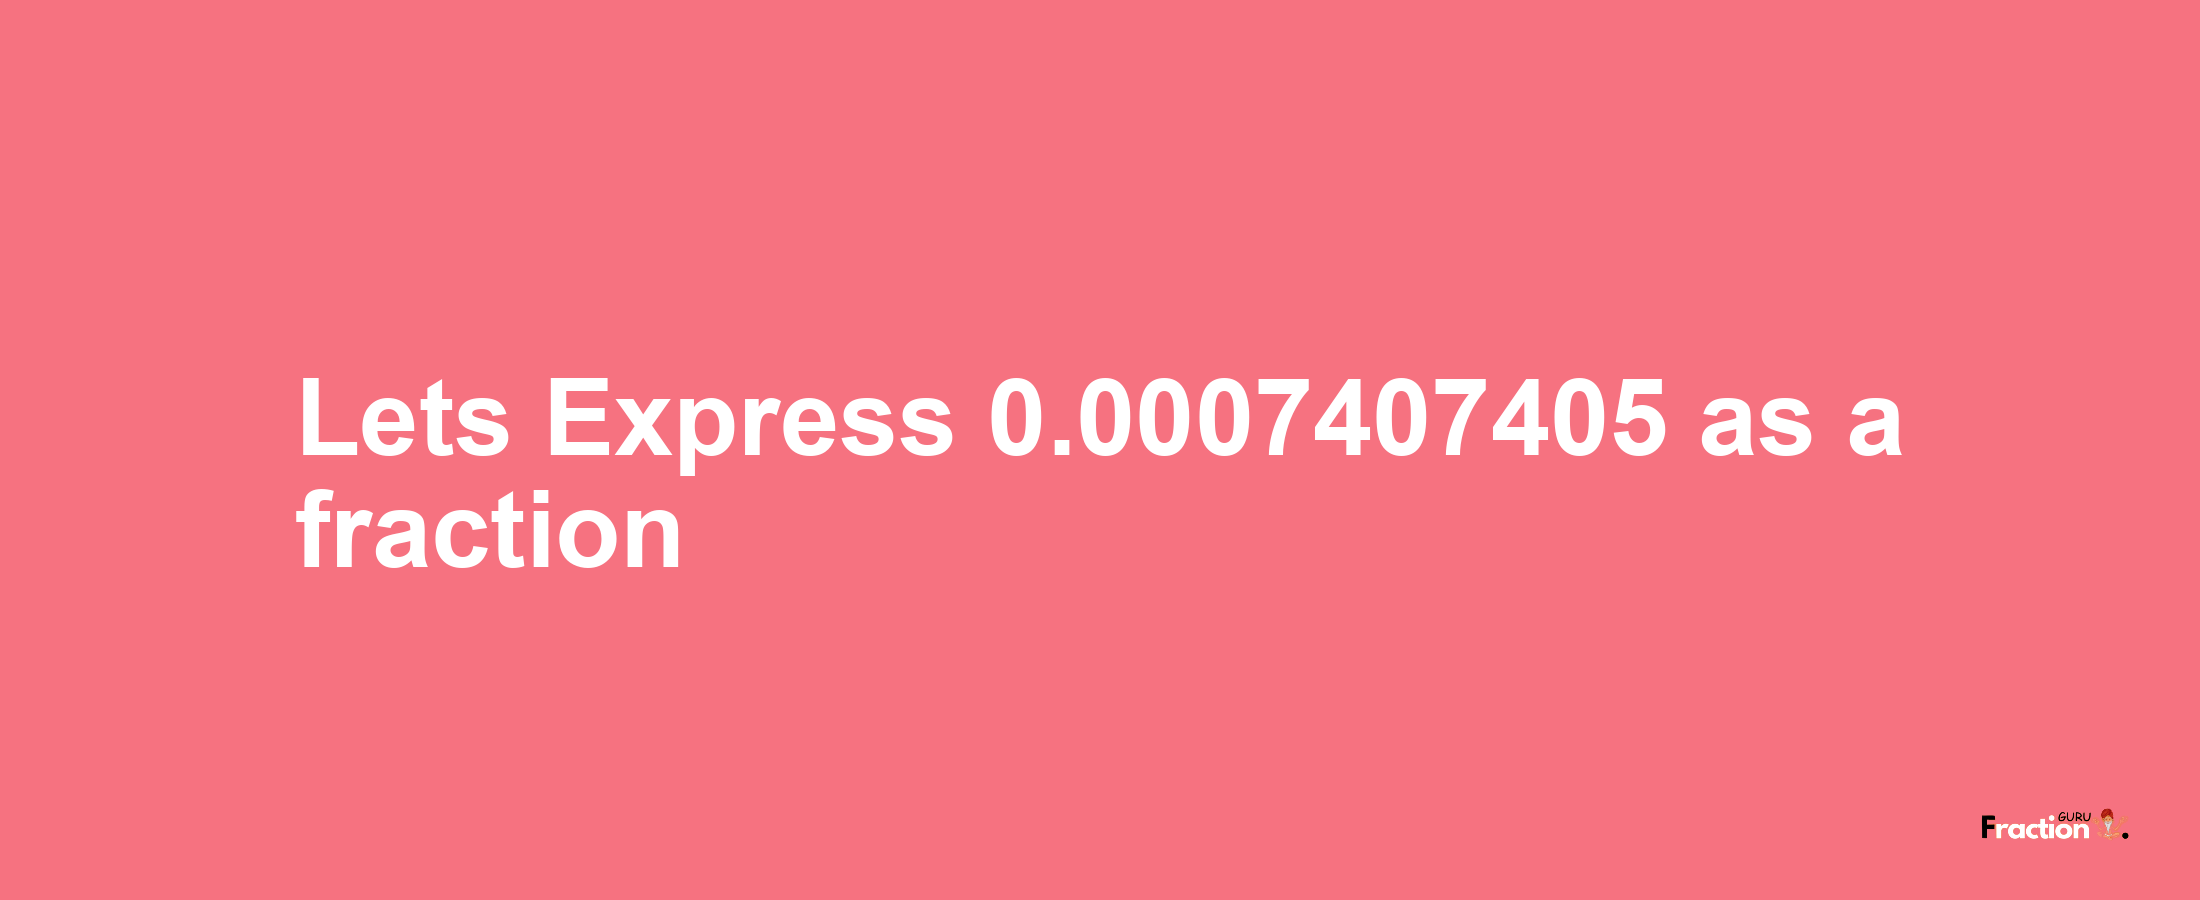 Lets Express 0.0007407405 as afraction